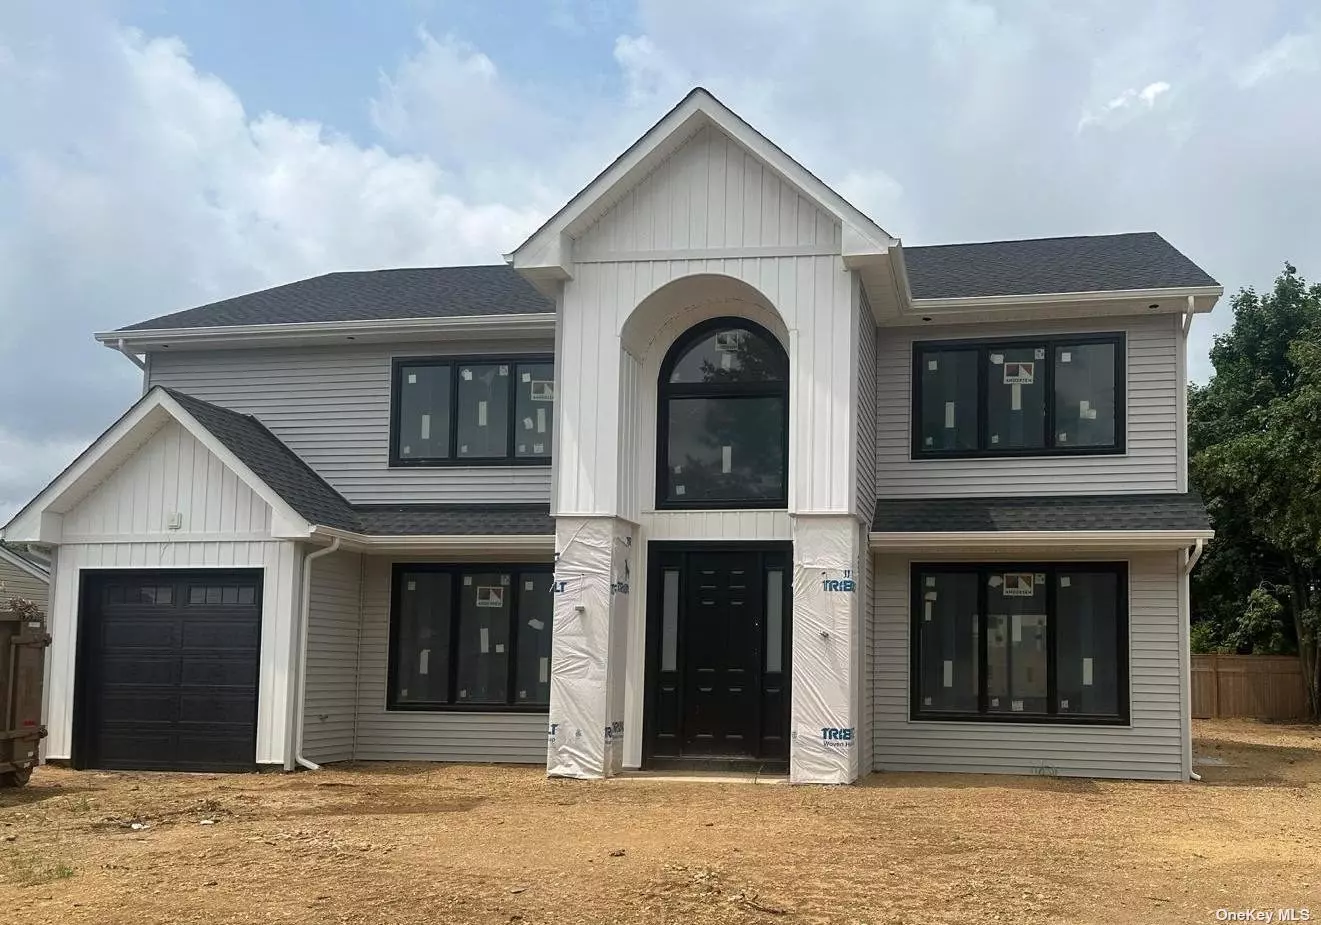 Don&rsquo;t miss the opportunity to own this exceptional new construction home. This property is move-in ready by September 2023 with an impressive range of features that combine luxury, functionality and style.  The home features a two car driveway, 9&rsquo; ceilings throughout, an 18&rsquo; entry foyer, and a 9&rsquo; basement with spray foam insulation and an outside entrance (OSE).  The kitchen is a chef&rsquo;s dream with a designer appliance package (including a 36 natural gas cooktop), oversized center island w/ waterfall edges, quartz stone backsplash and seperate butler&rsquo;s pantry. This home features 5 large bedrooms including a first floor bedroom with full bath, as well as primary and junior suites with en-suite bathrooms and laundry room on the second floor.  The home is energy efficient with Anderson 400 series windows, smart thermostats, cameras and a designated electric car charging port. The backyard is fully PVC fenced for privacy and offers a huge paver patio to entertain friends and family.  This home is ideally situated in the prestigious community of Bethpage, NY, which offers convenience and accessibility to exceptional schools, shopping designations, gourmet dining and major transportation routes.